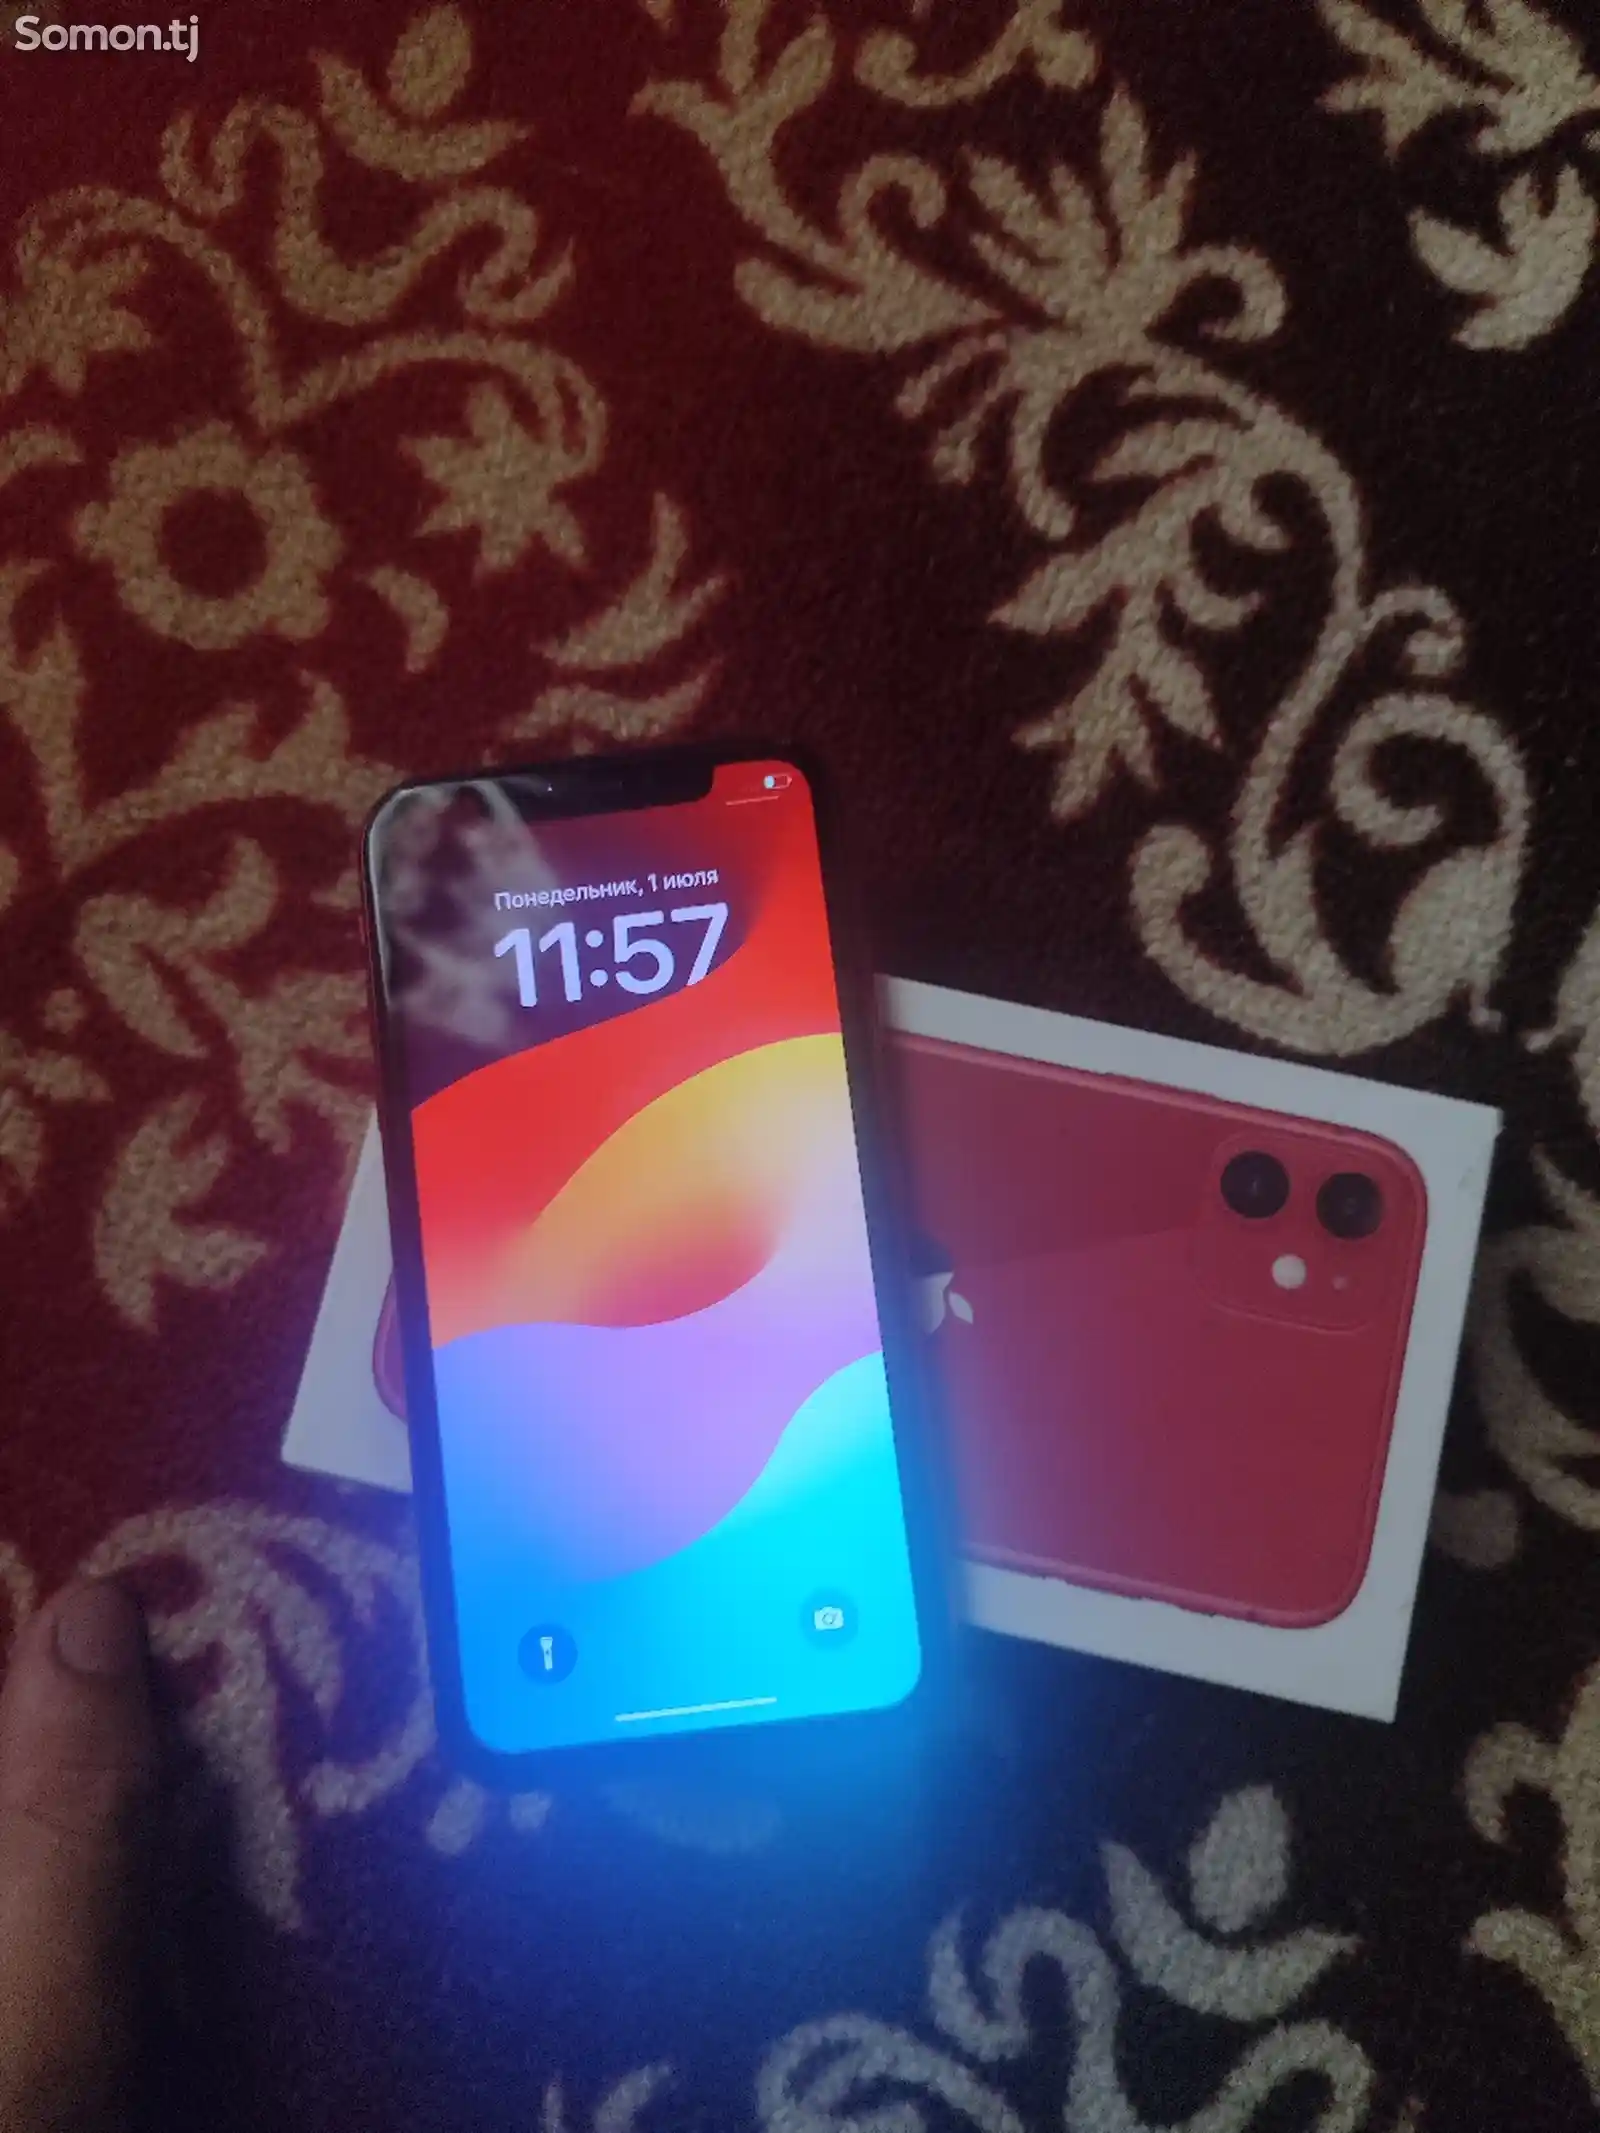 Apple iPhone 11, 128 gb, Product Red-2